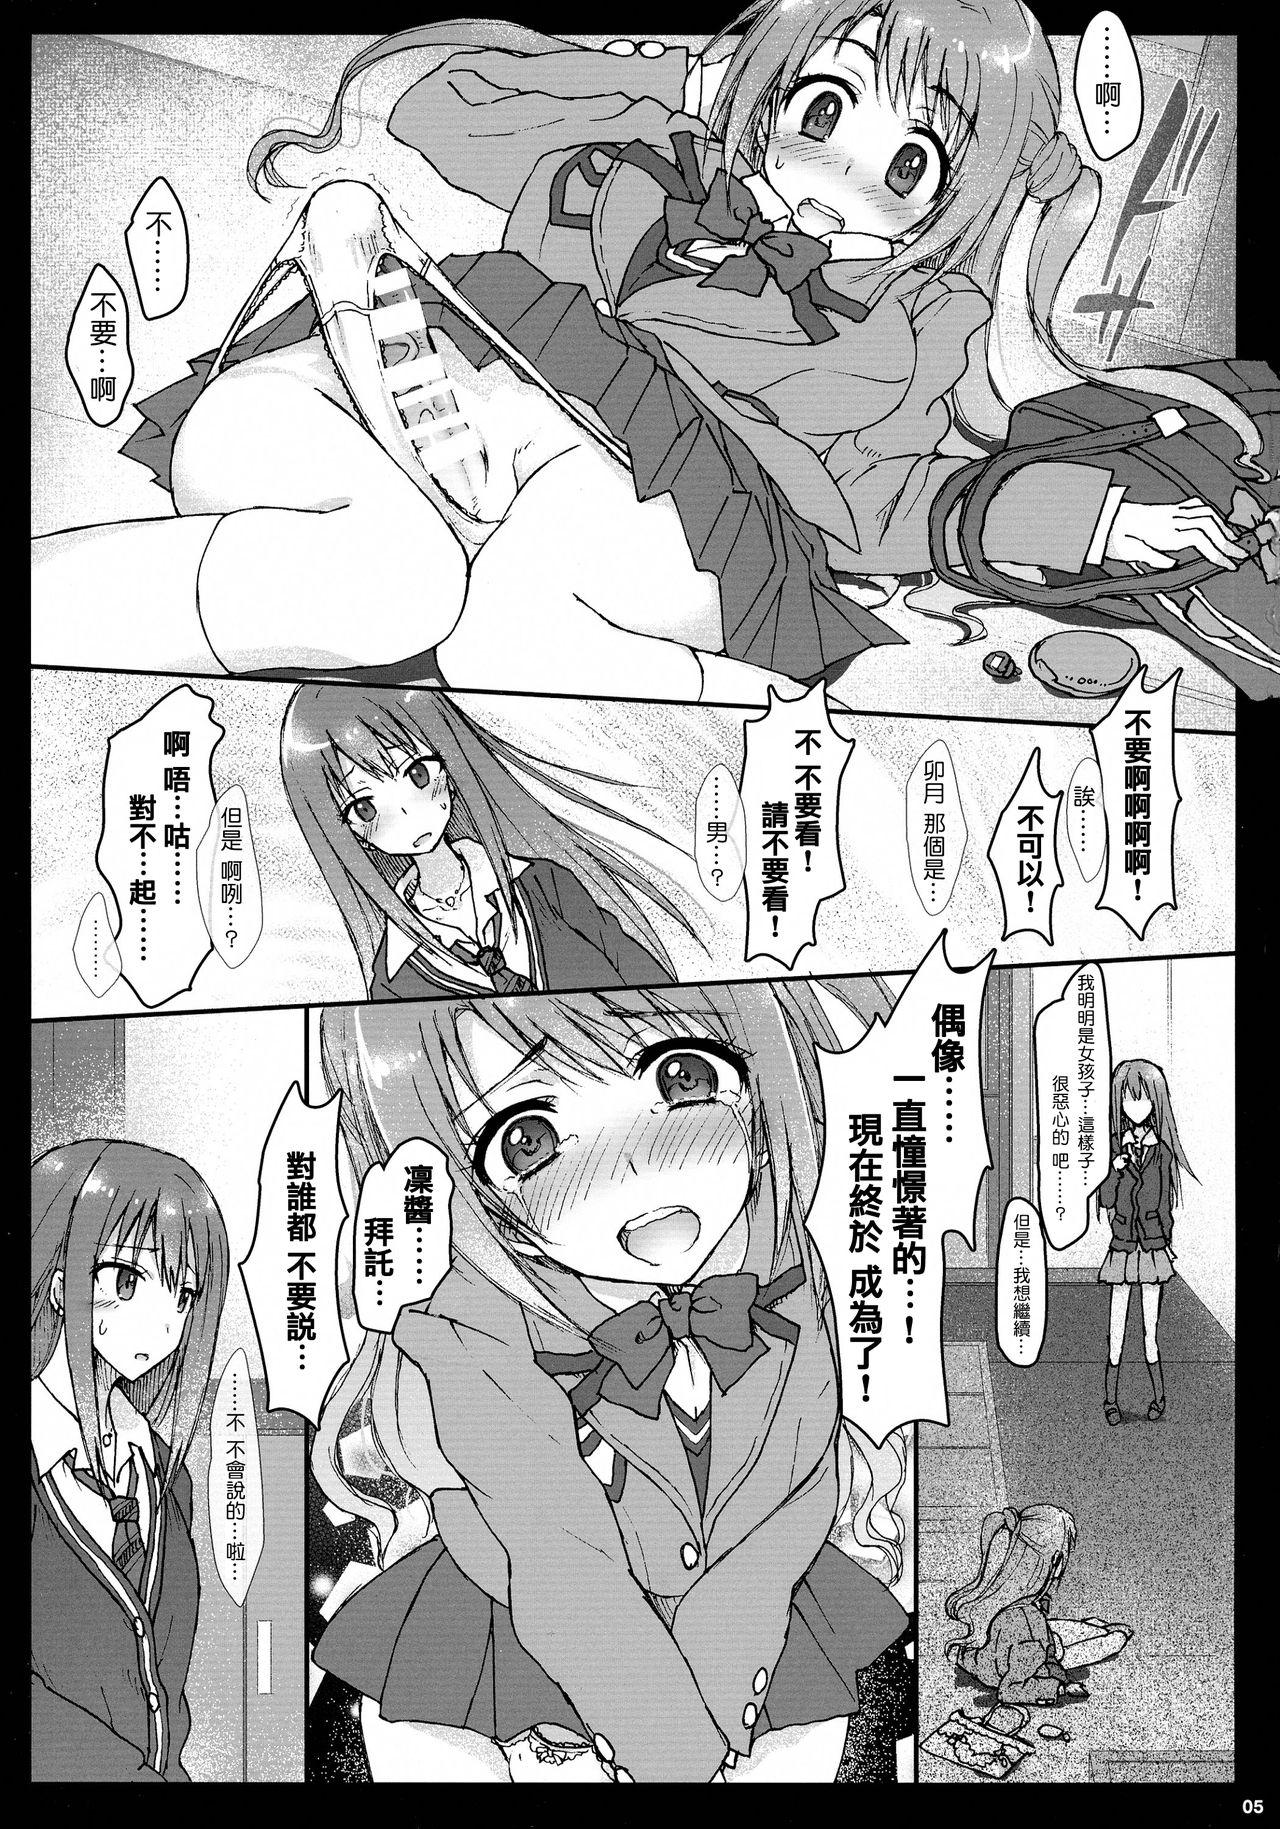 New AND THEY LIVED happily ever after... 002 - The idolmaster Masterbation - Page 5